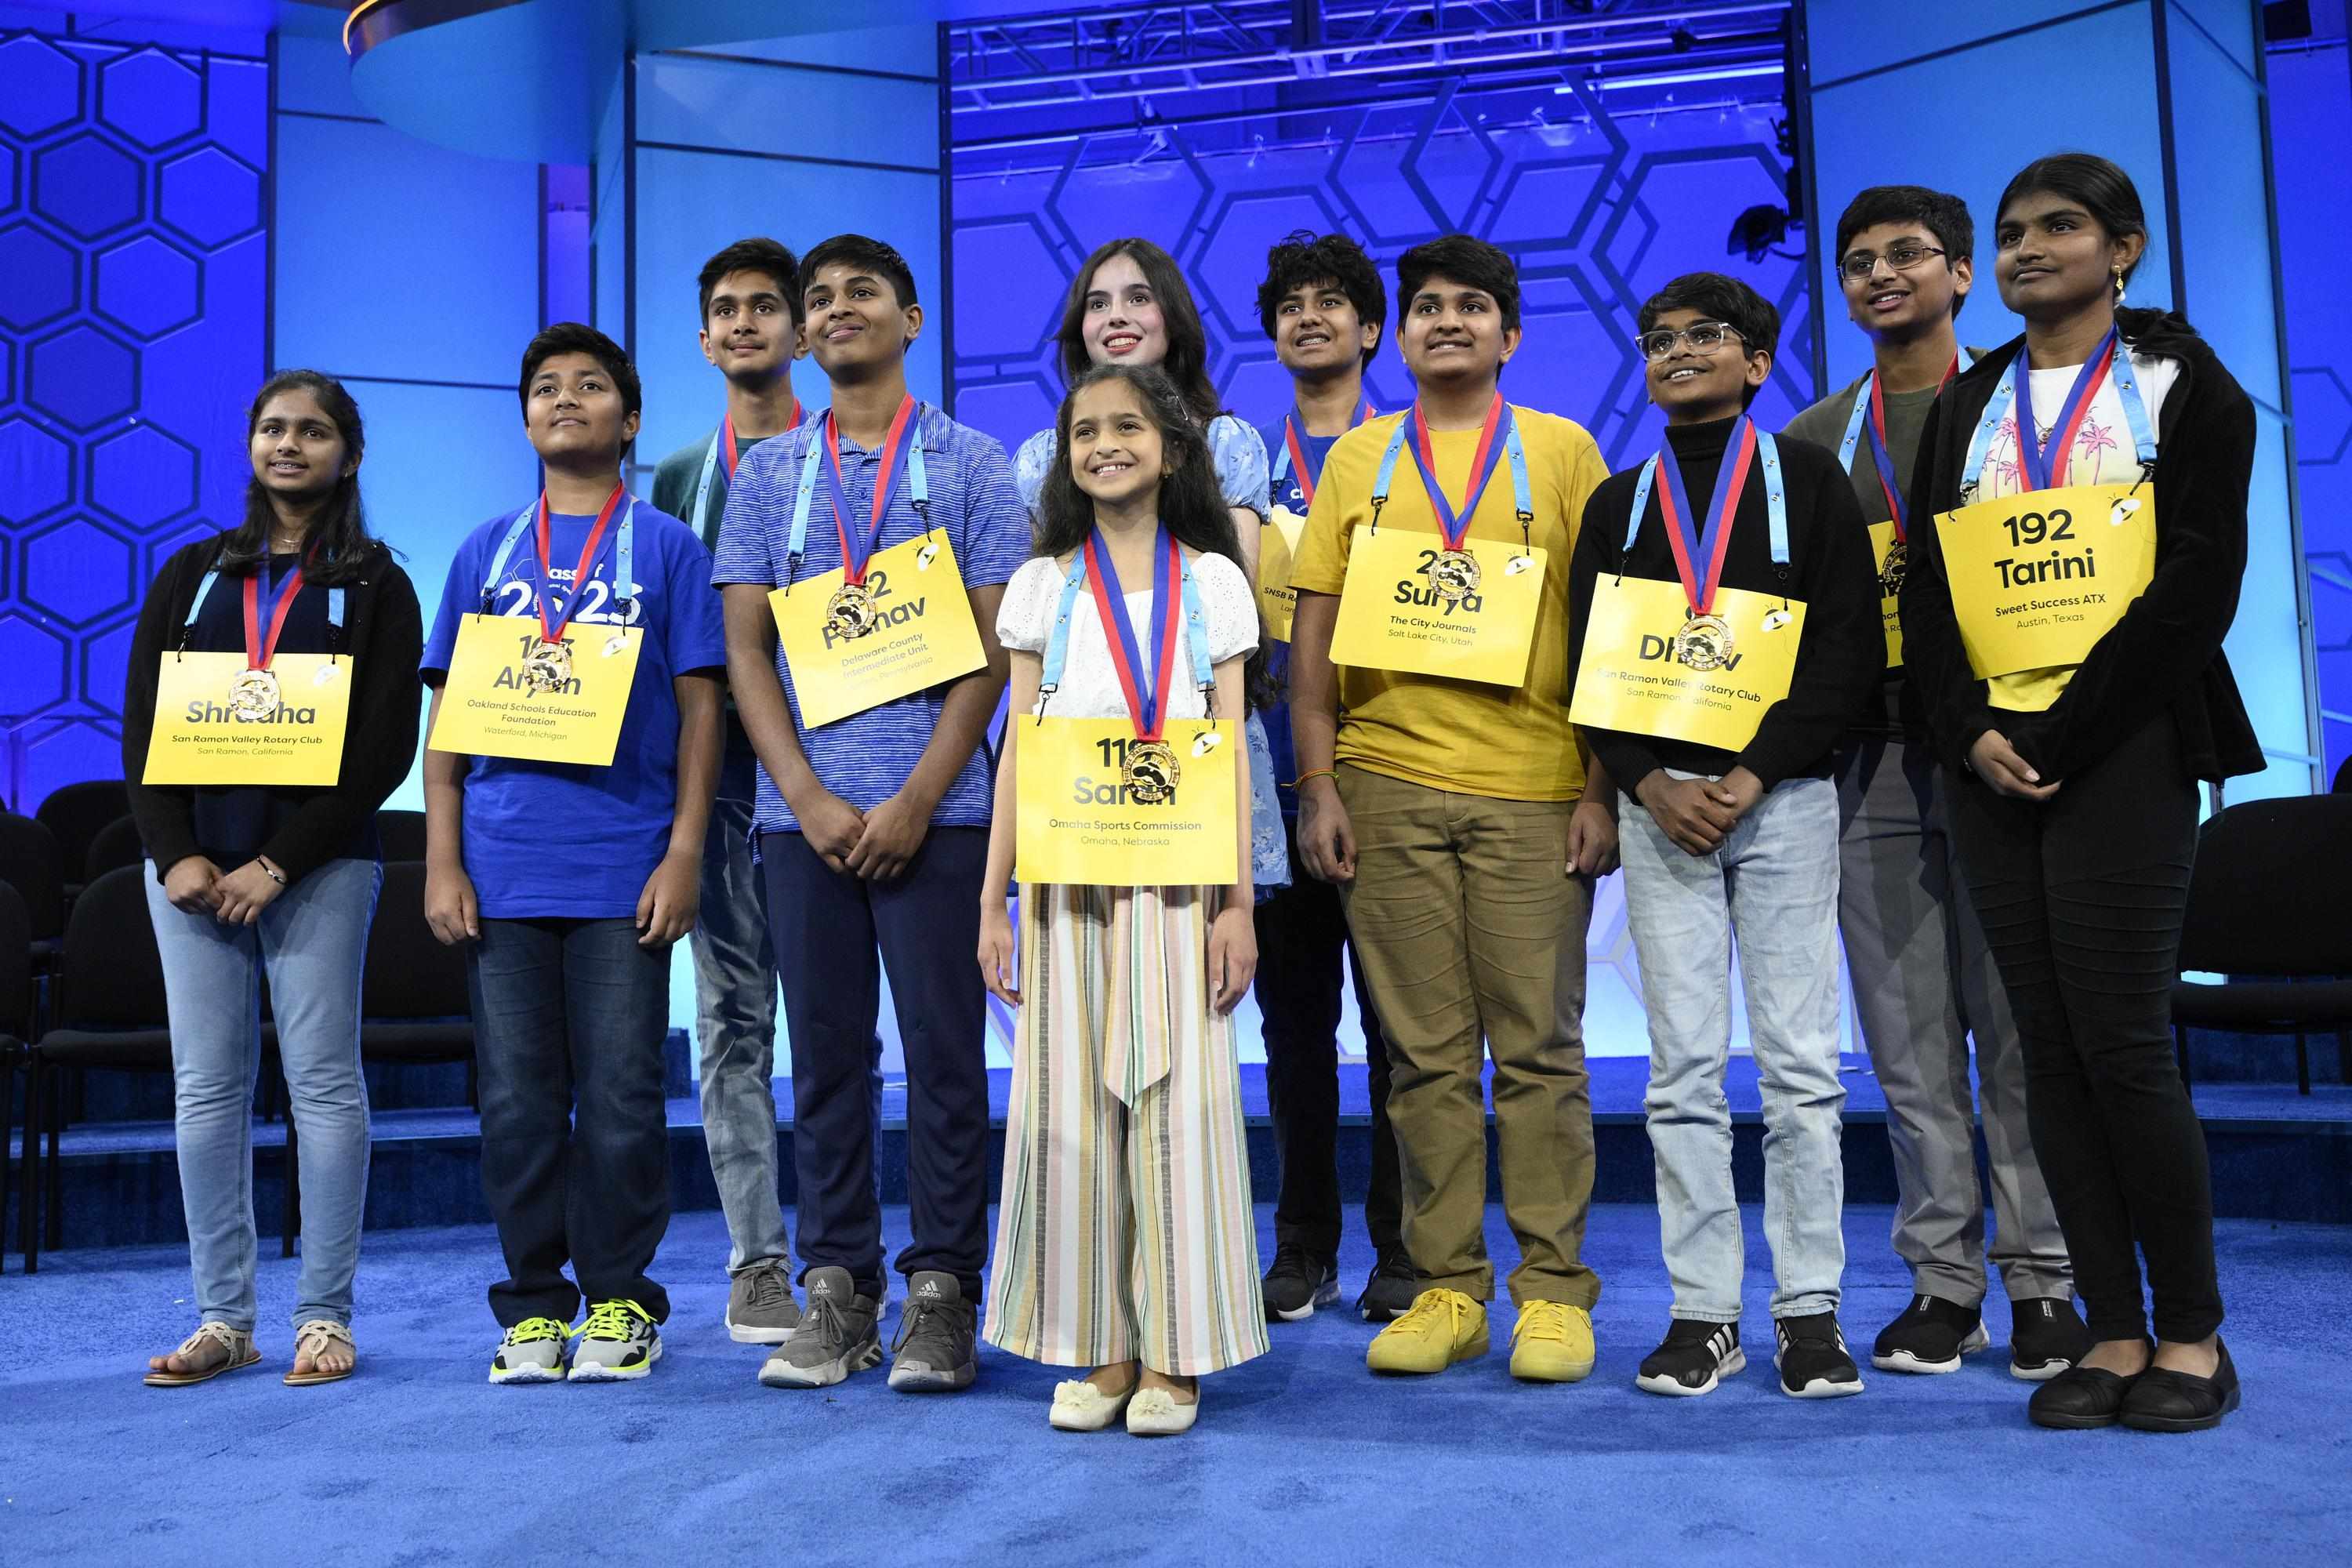 Top speller in English to be crowned at Scripps National Spelling Bee